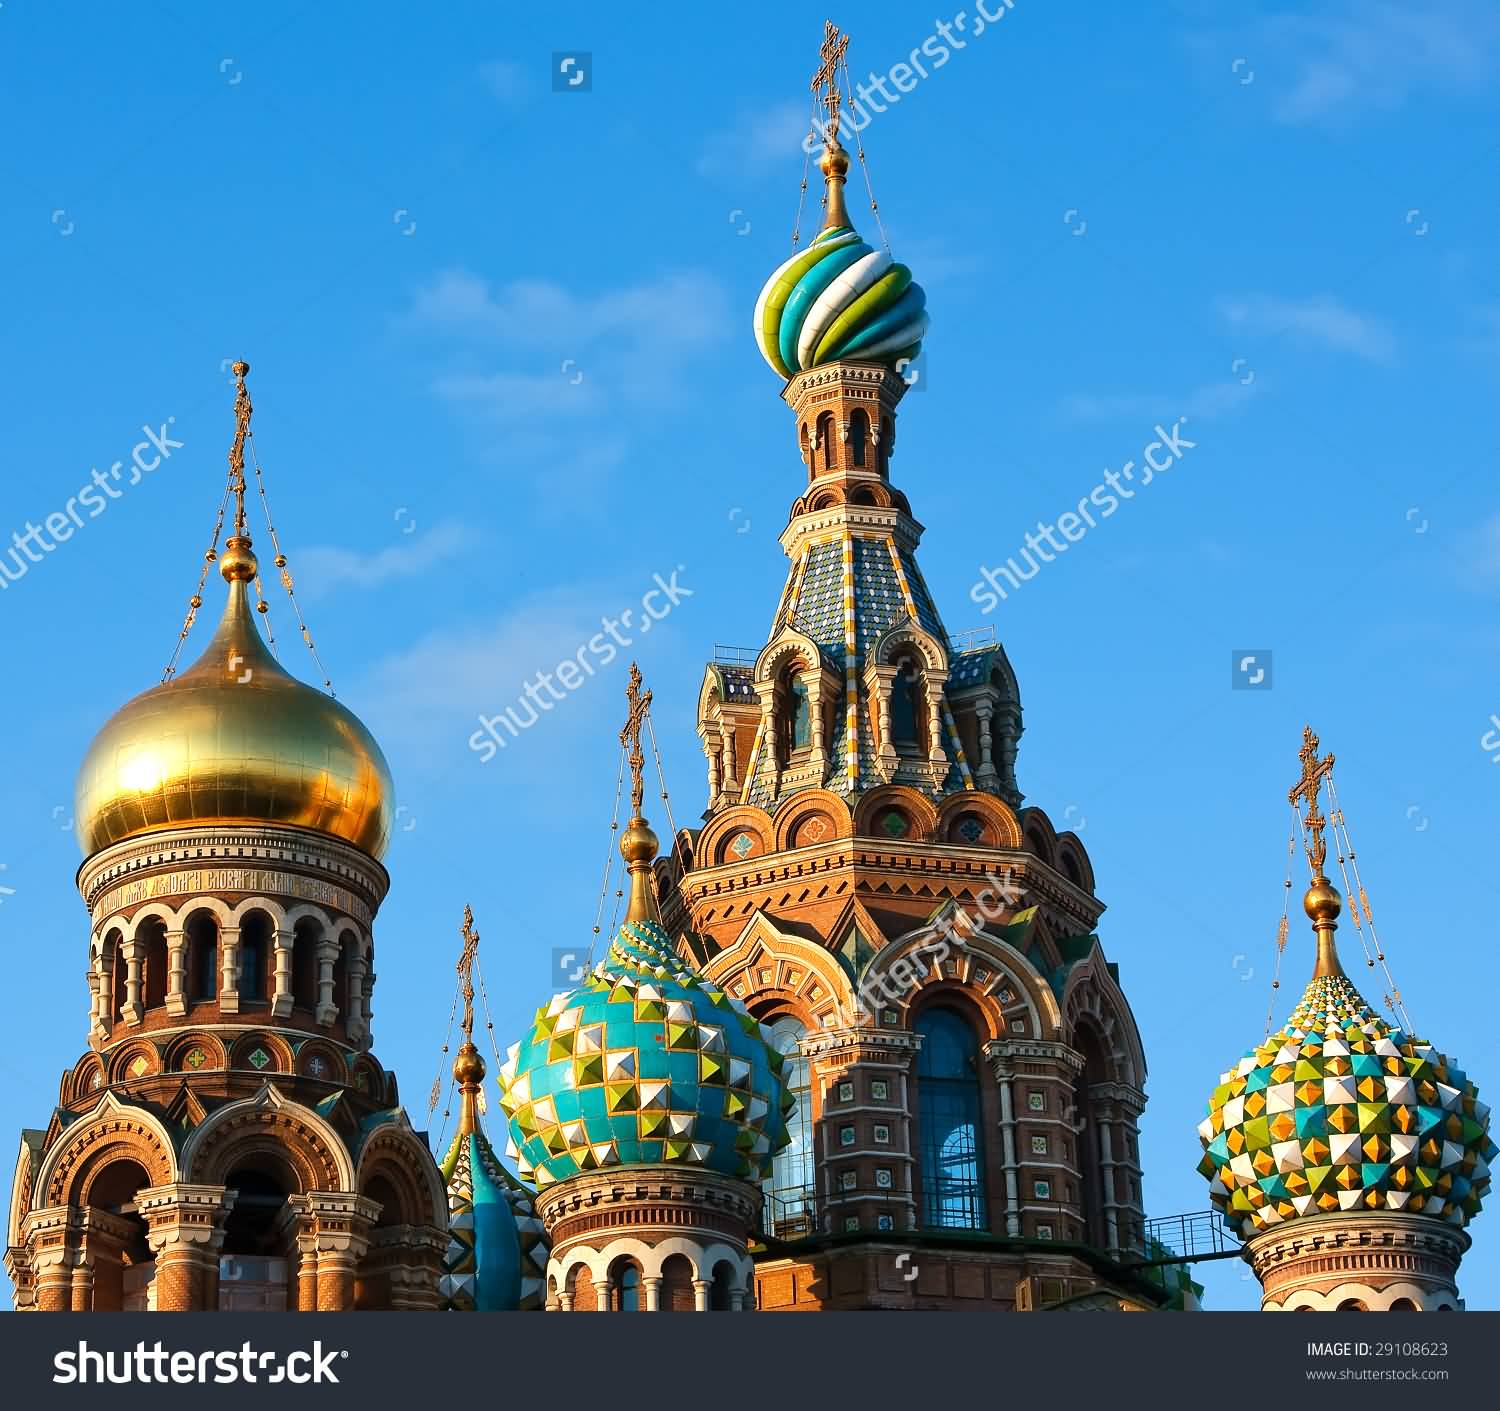 Exterior View Of The Church Of The Savior On Blood In Russia